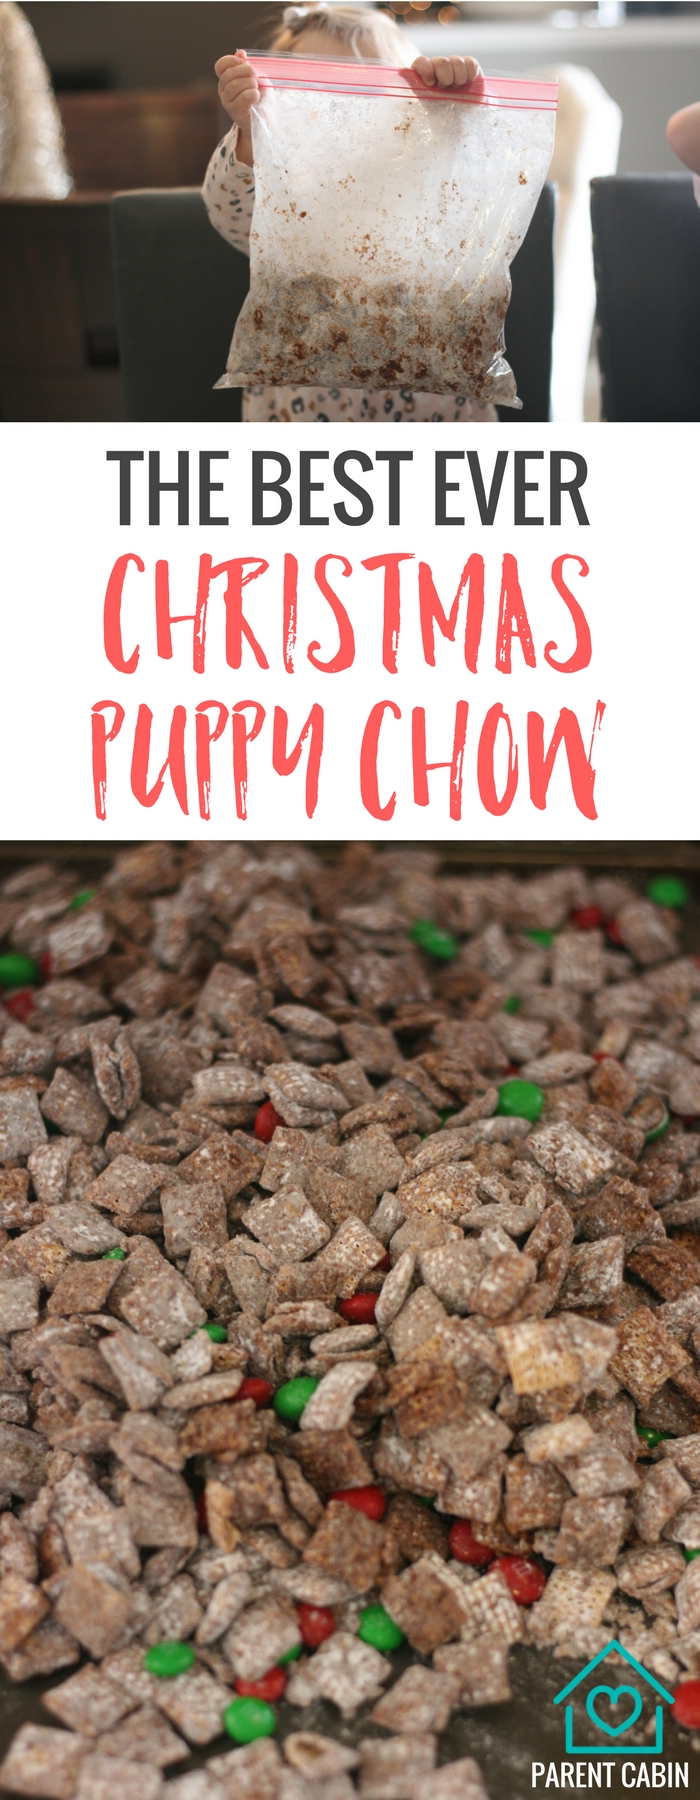 If you're looking for a treat to make, this Christmas puppy chow recipe will be perfect. Impress anyone with this super easy and delicious treat. 